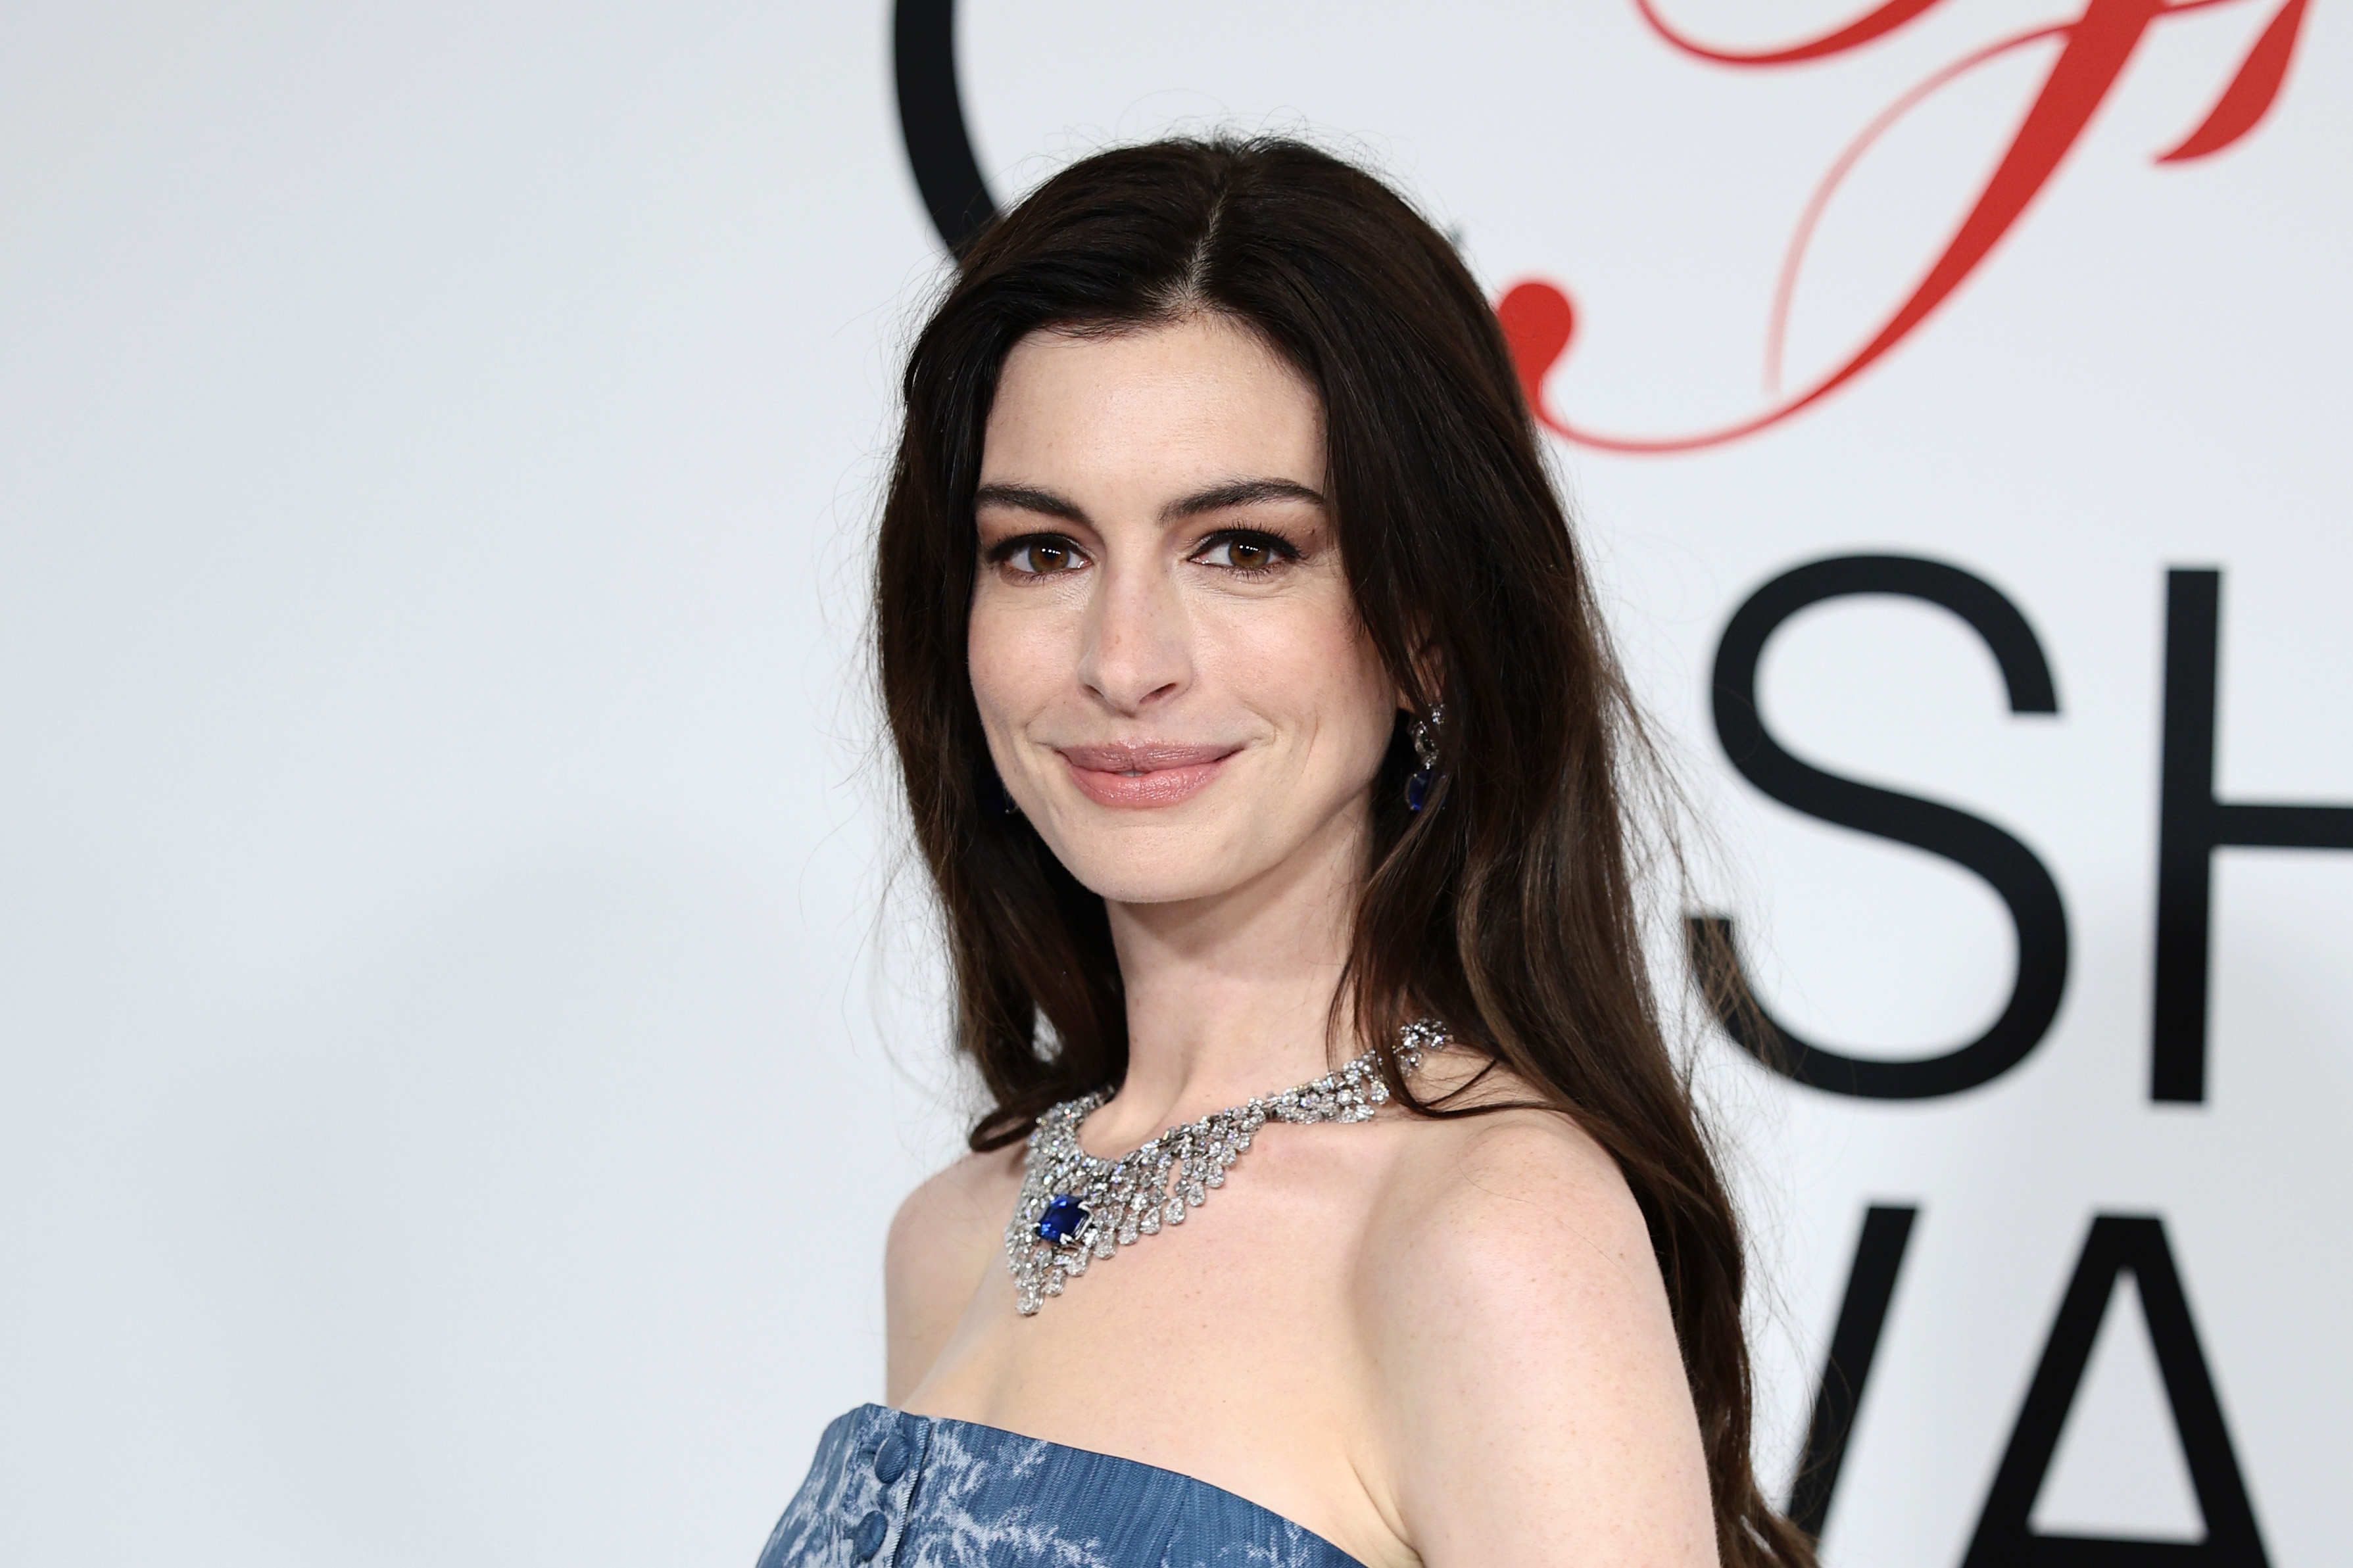 Anne Hathaway wearing an off-shoulder gown with a sparkling necklace, posing at an event